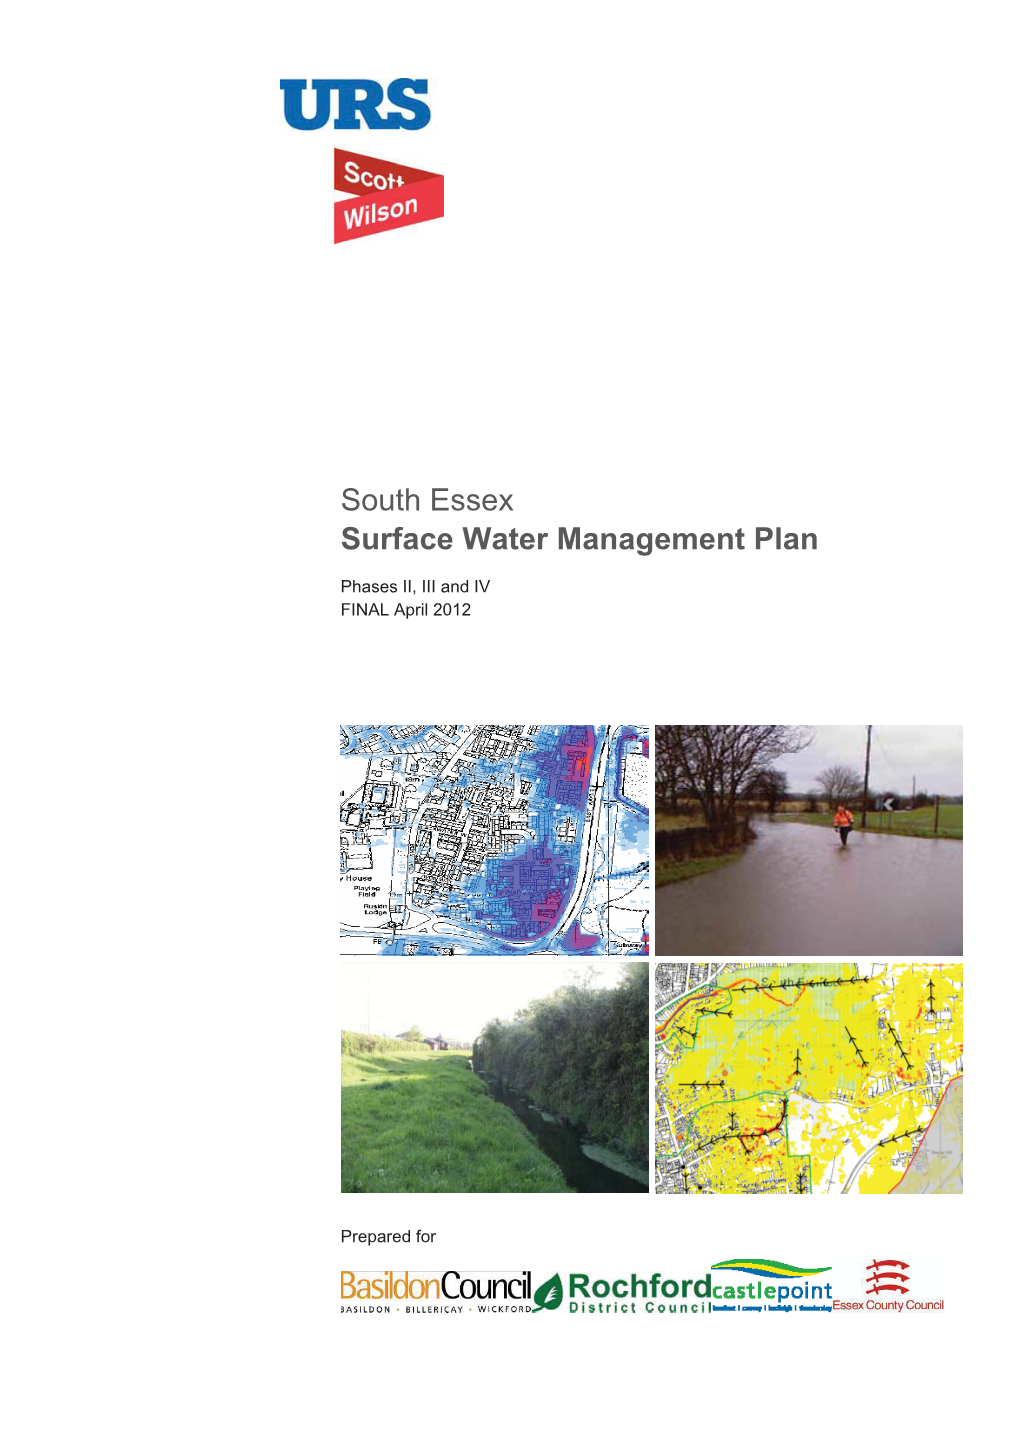 South Essex Surface Water Management Plan